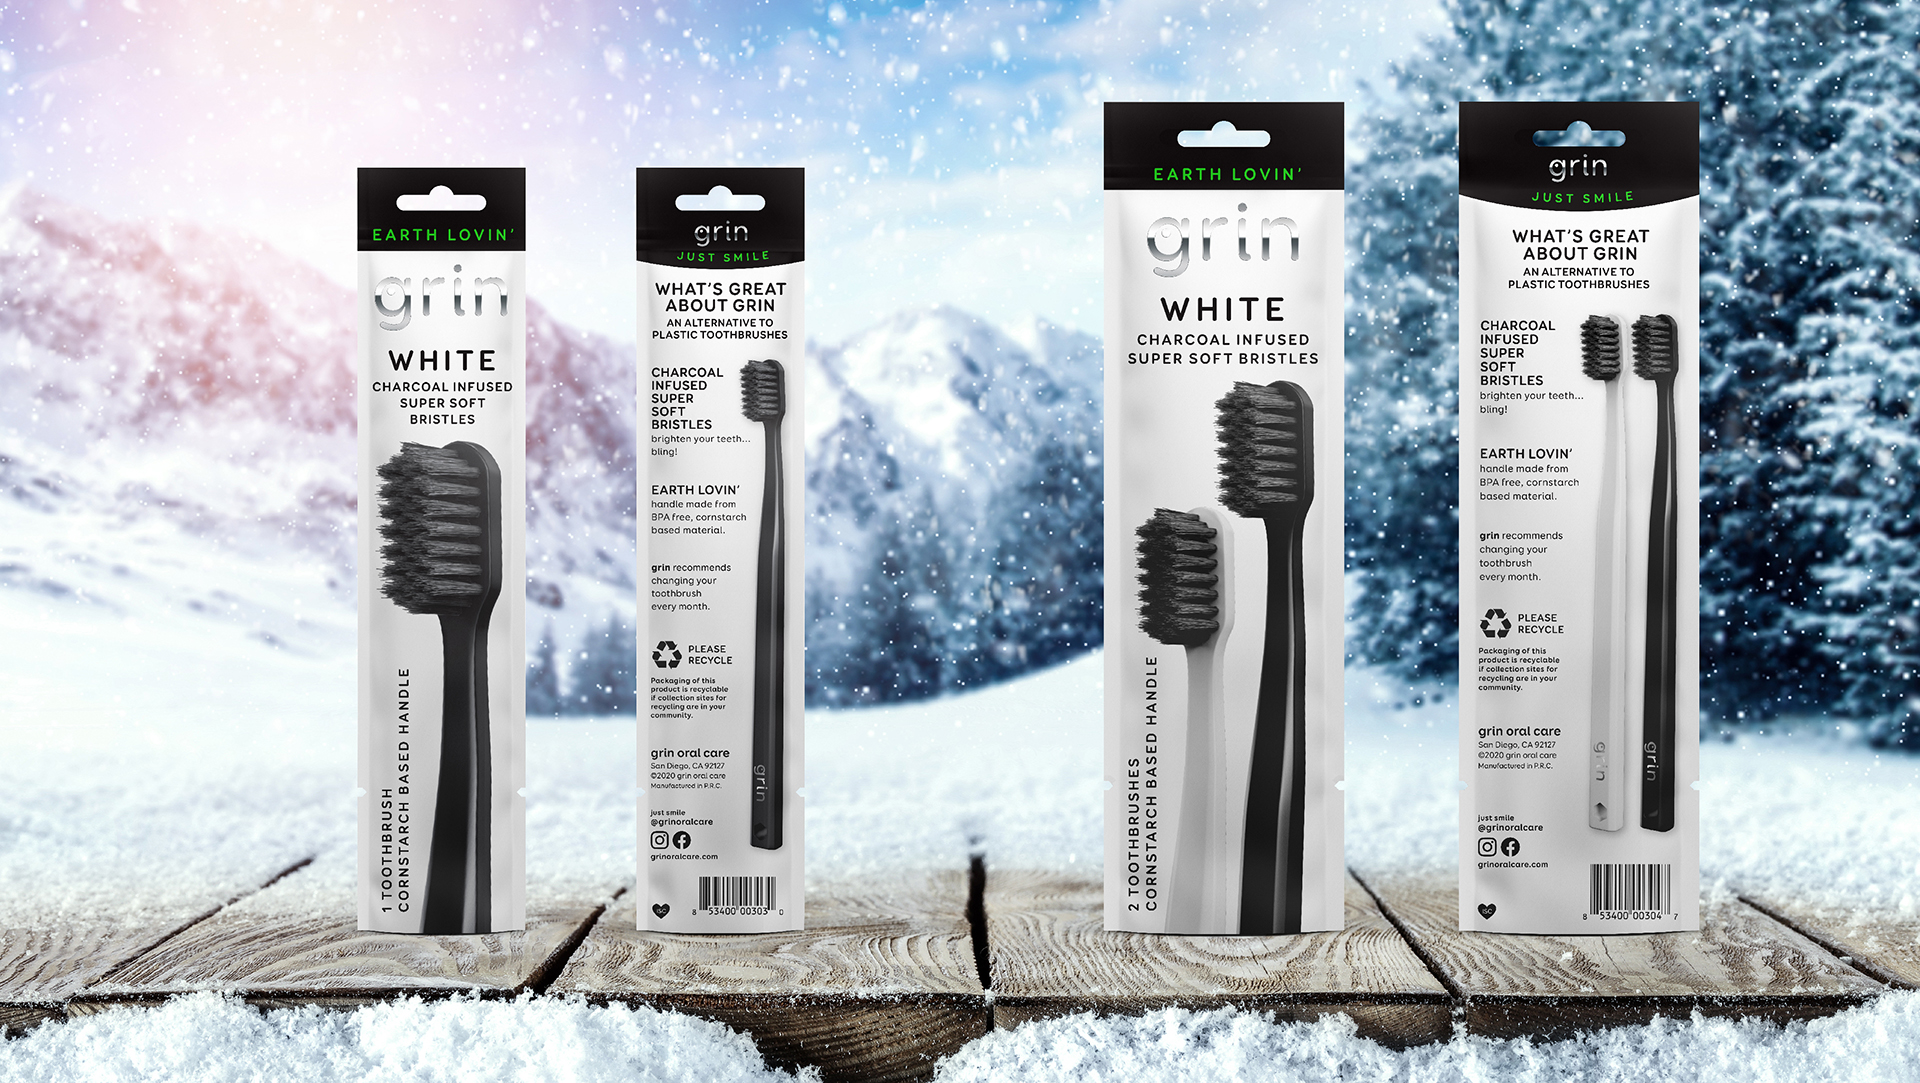 Grin Oral Care White Charcoal Infused Toothbrushes (2) Photography